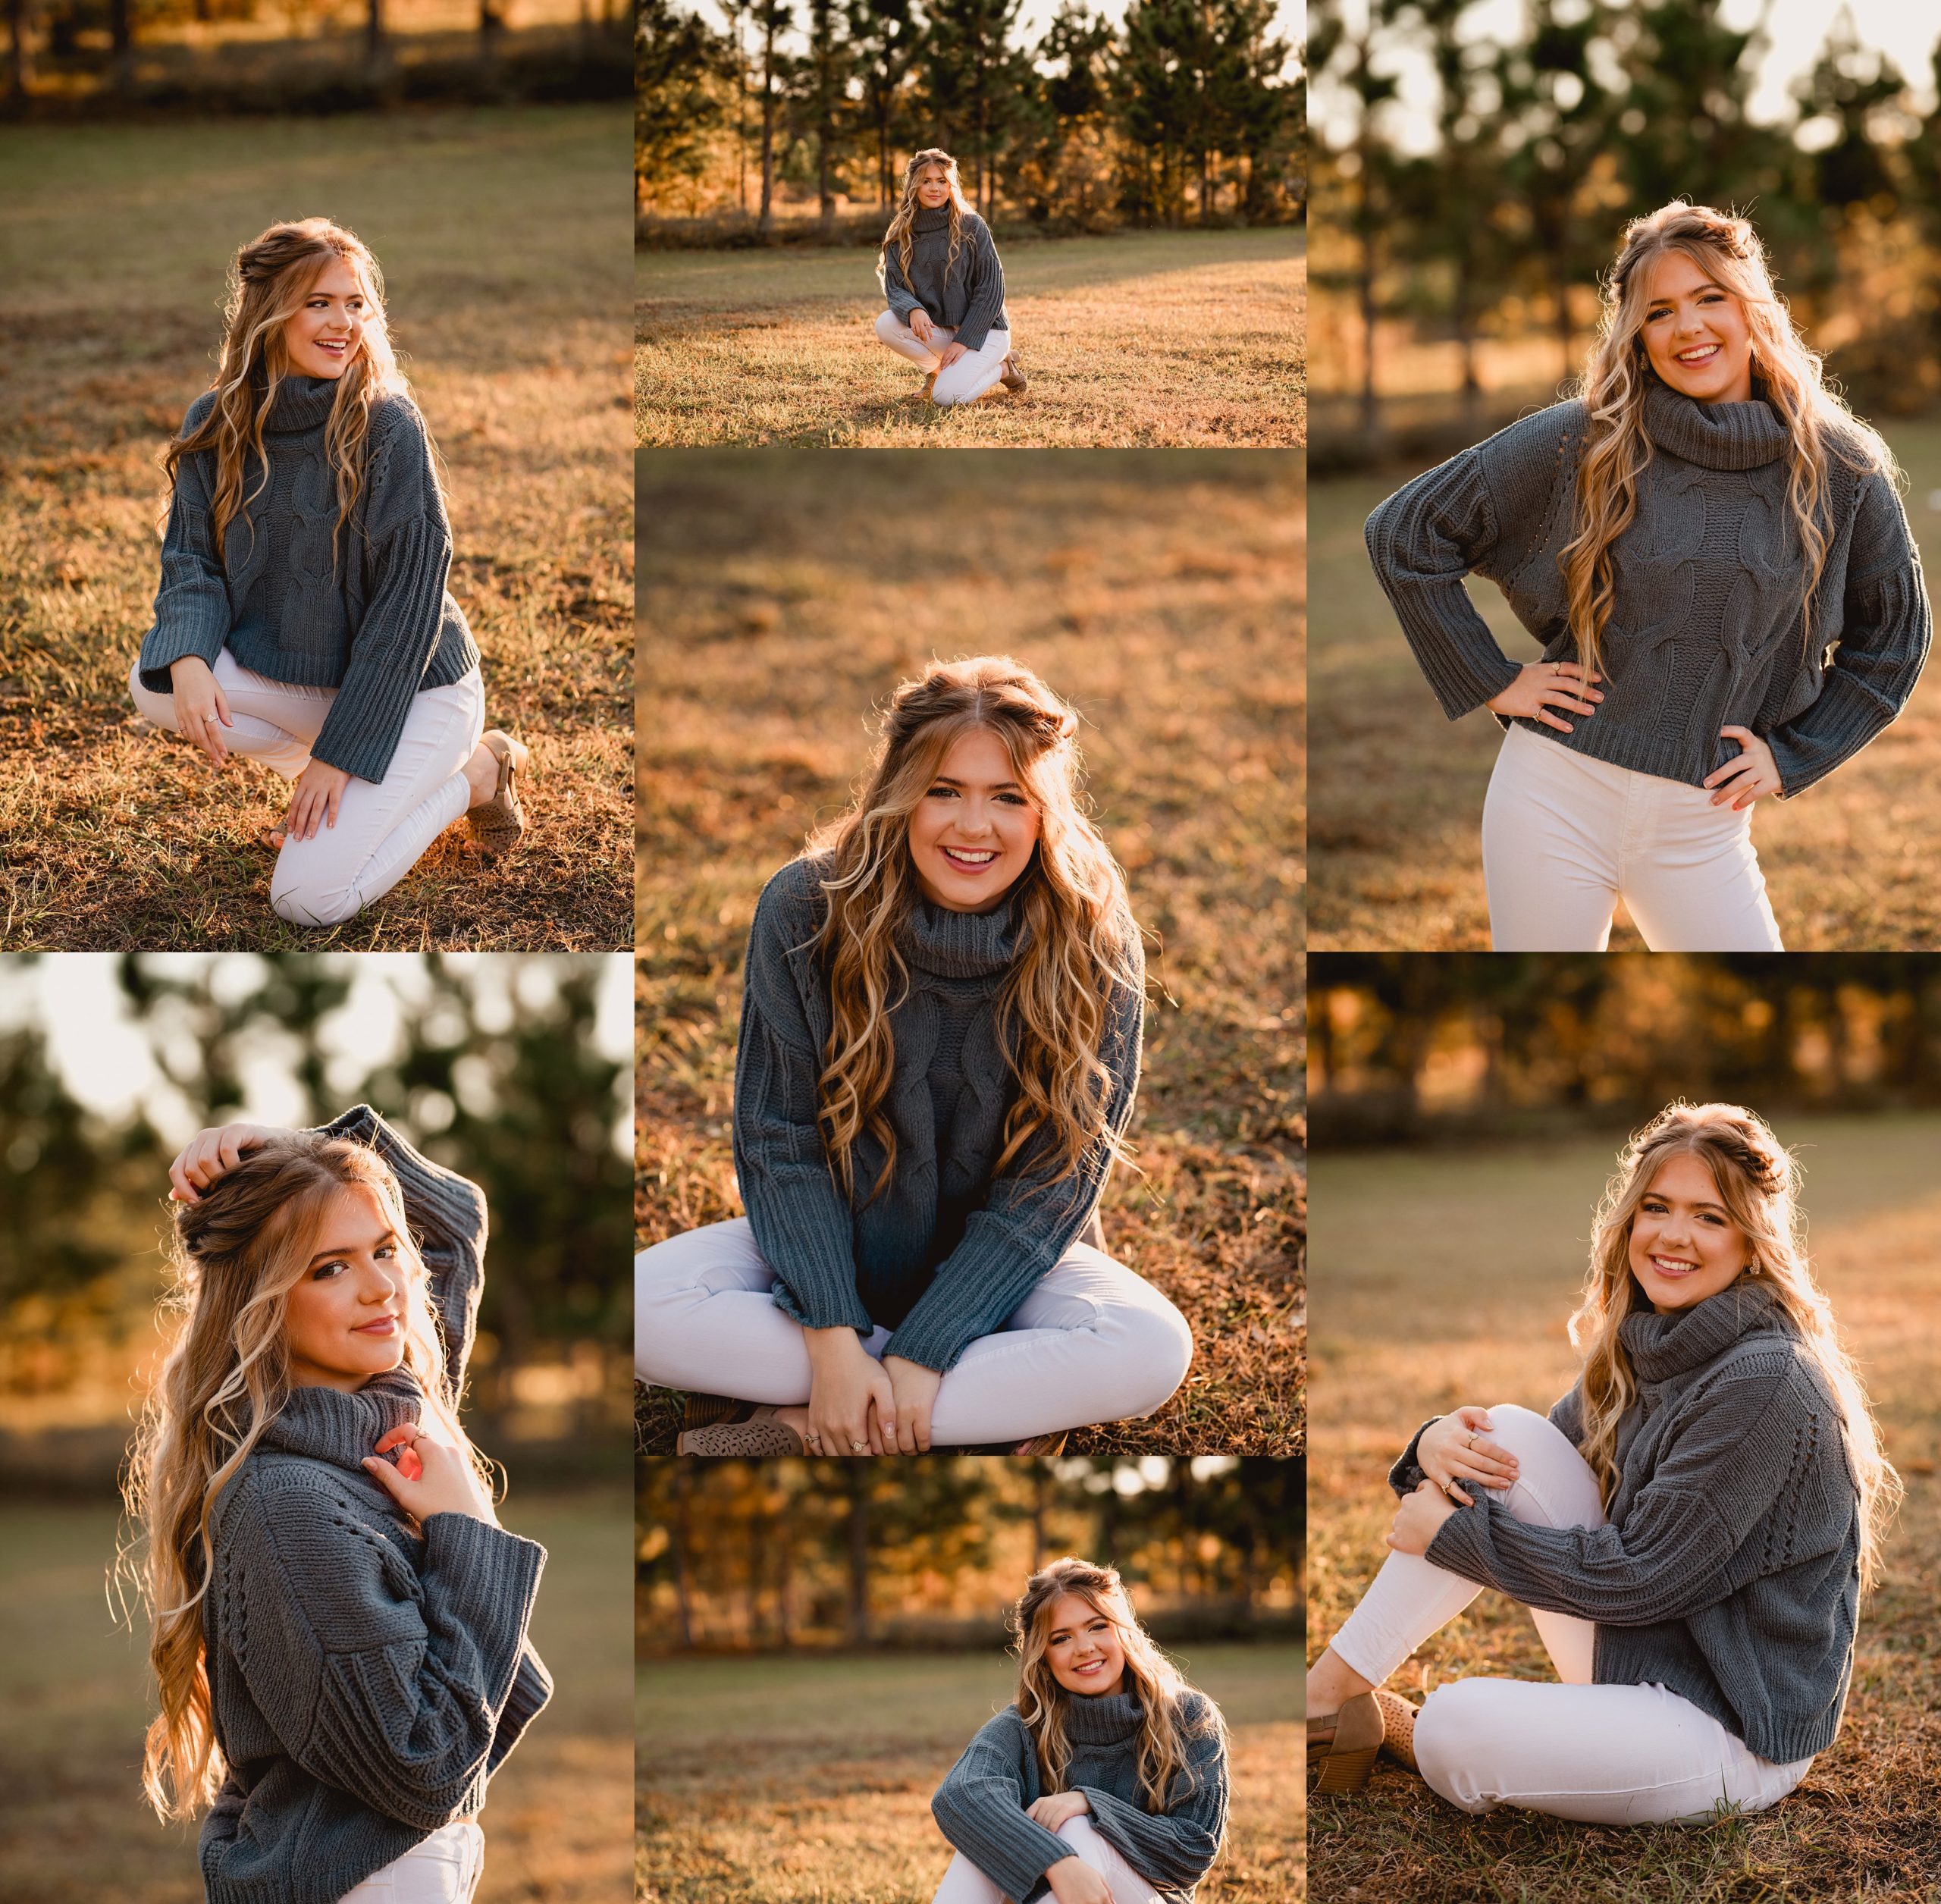 Cute poses for senior pictures at sunset wearing white jeans and sweater.